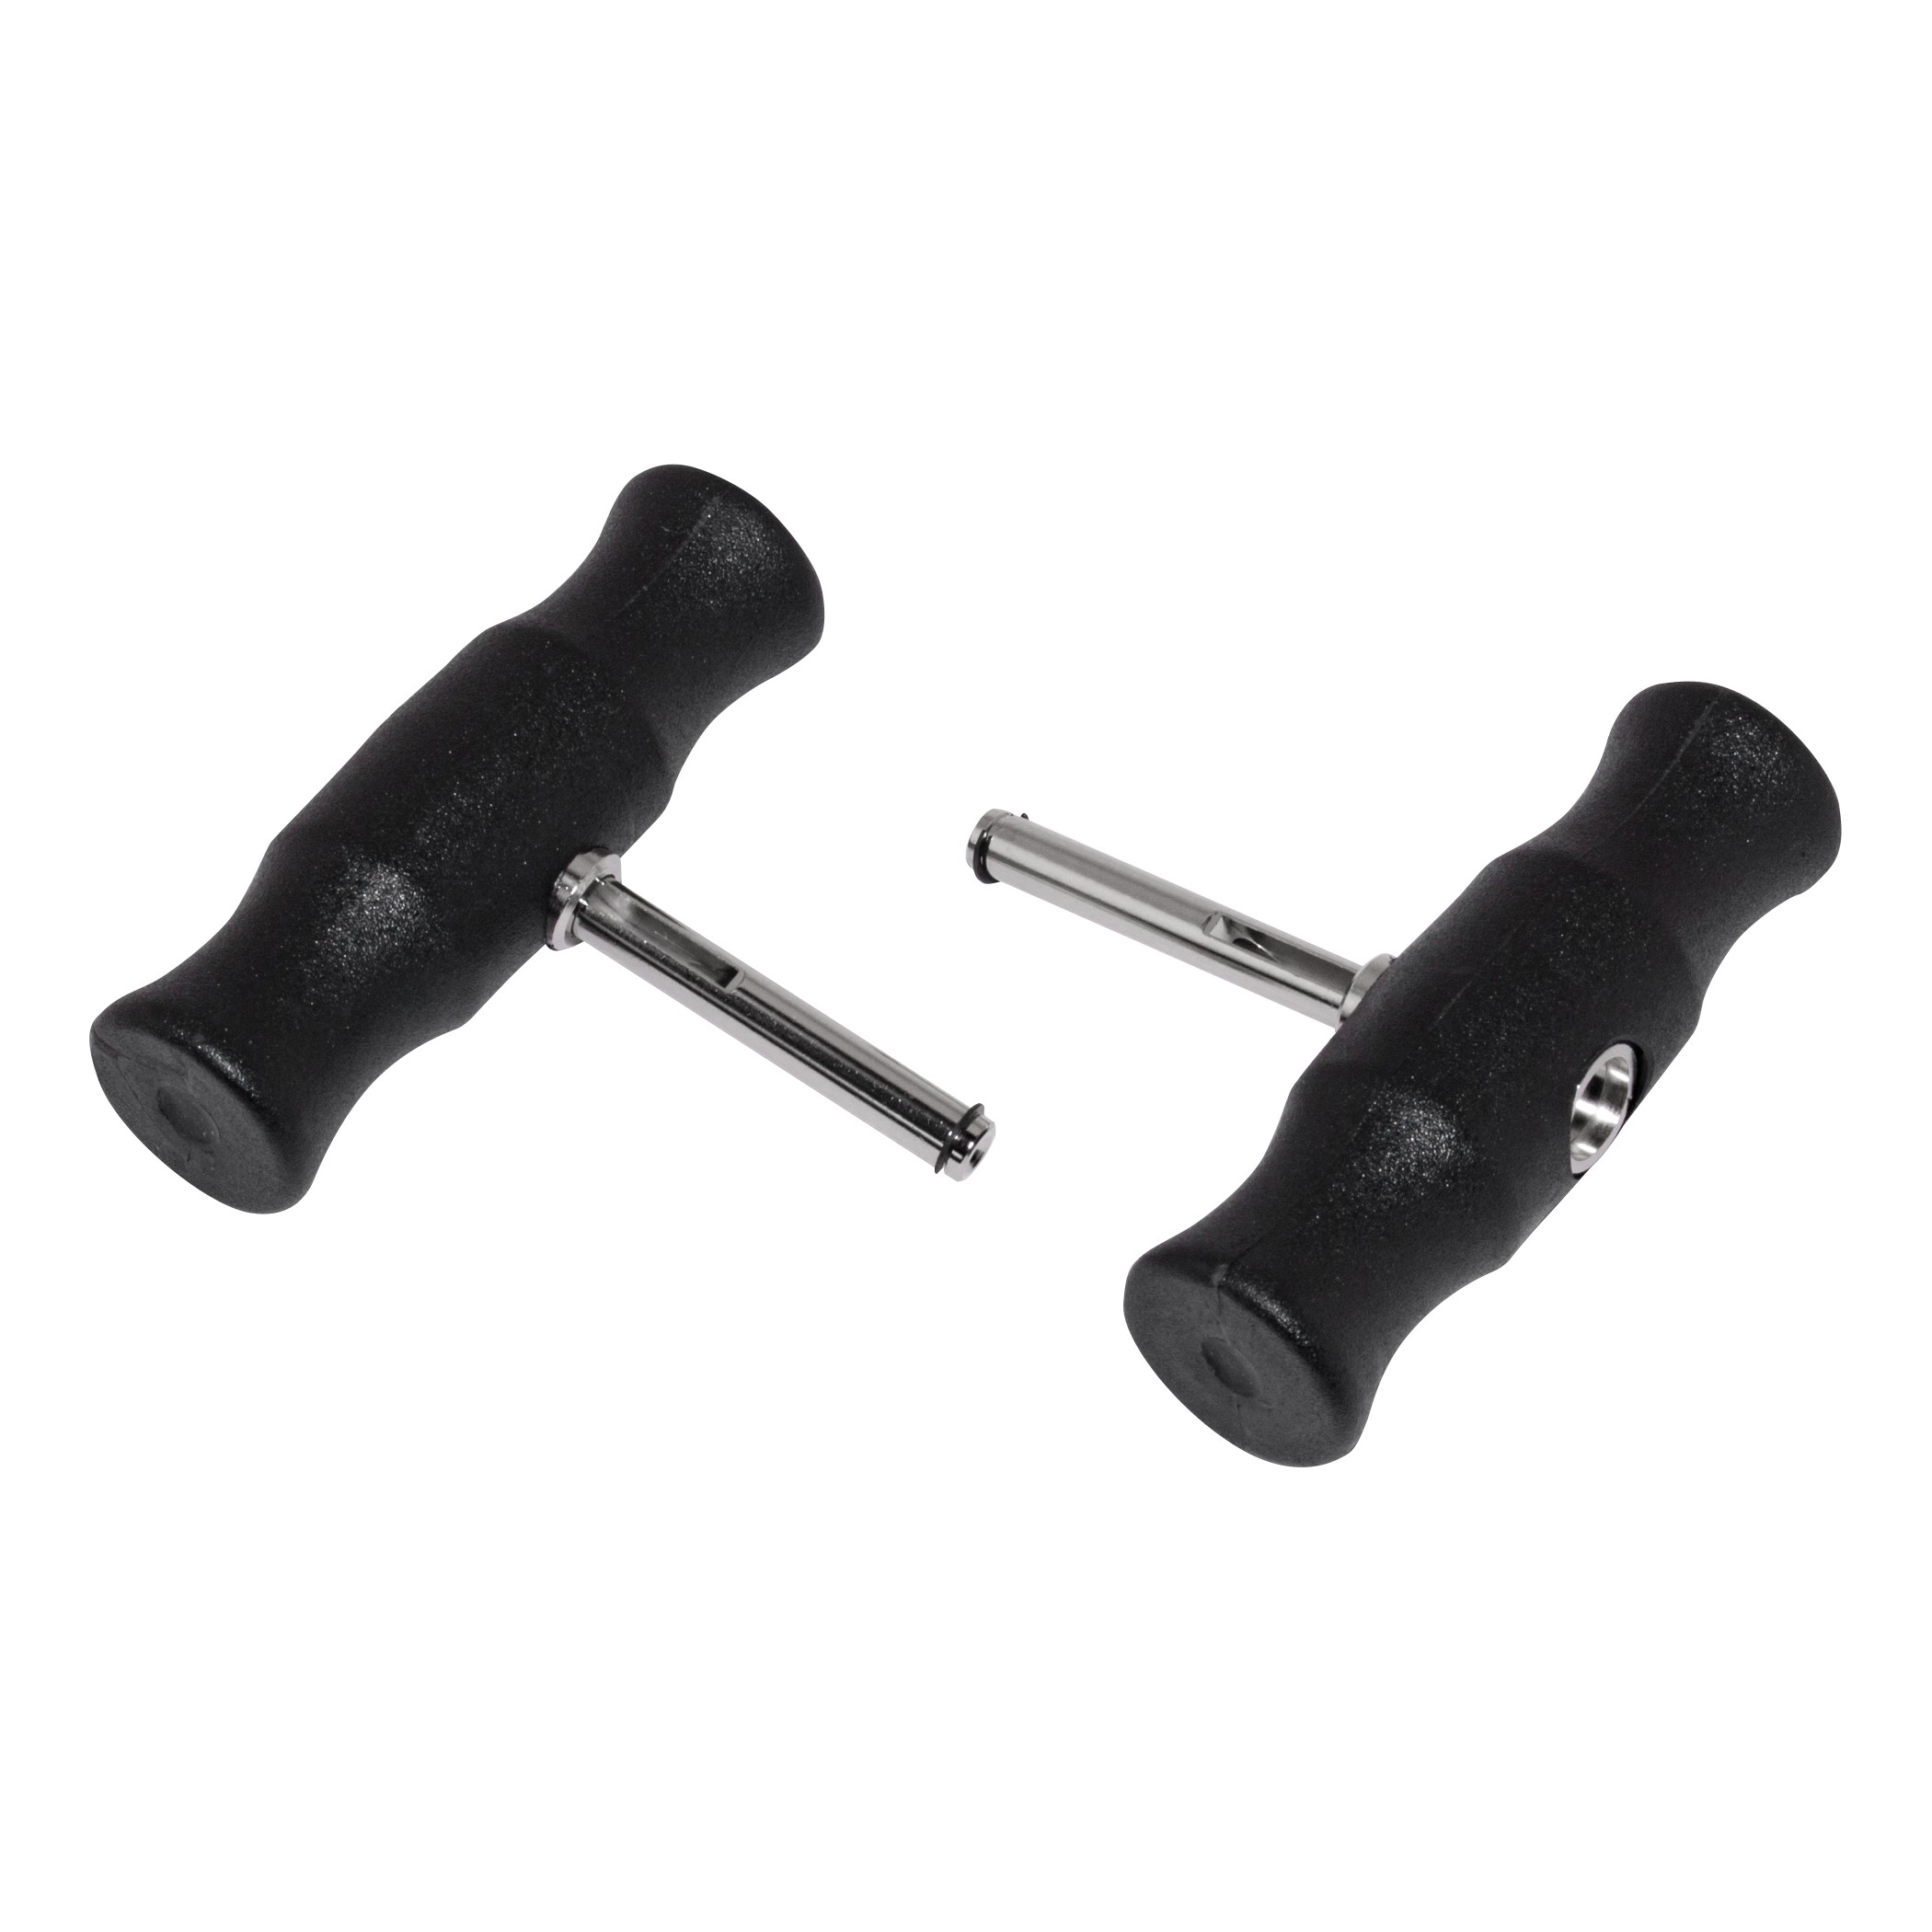 2pc Wire Gripping Handle Set